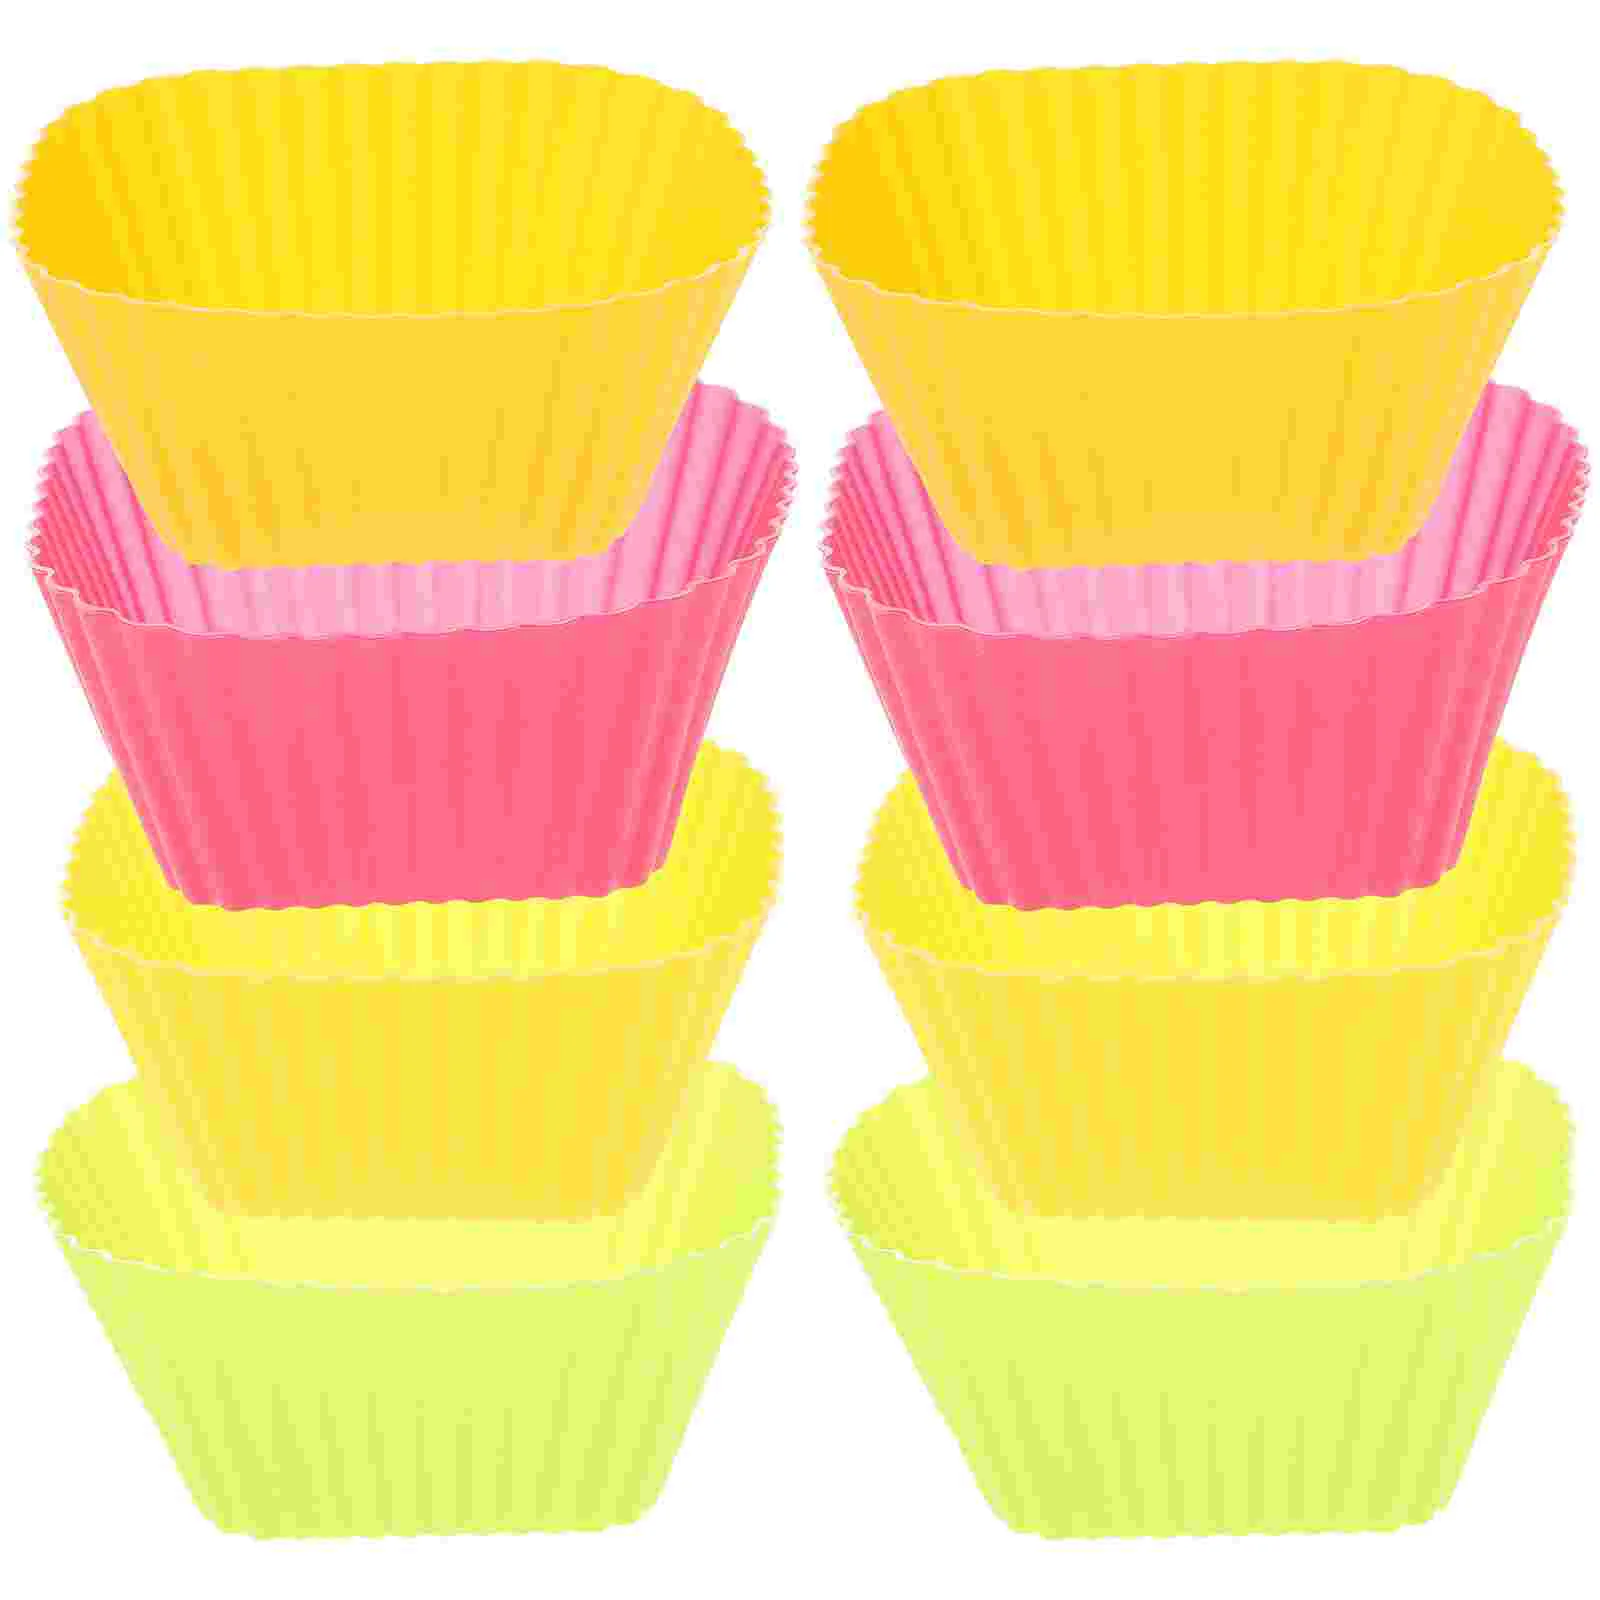 

Cups Baking Silicone Muffin Cupcake Liners Square Reusable Molds Rubber Cup Pans Kitchen Wrapper Stick Non Mold Cake Nonstick